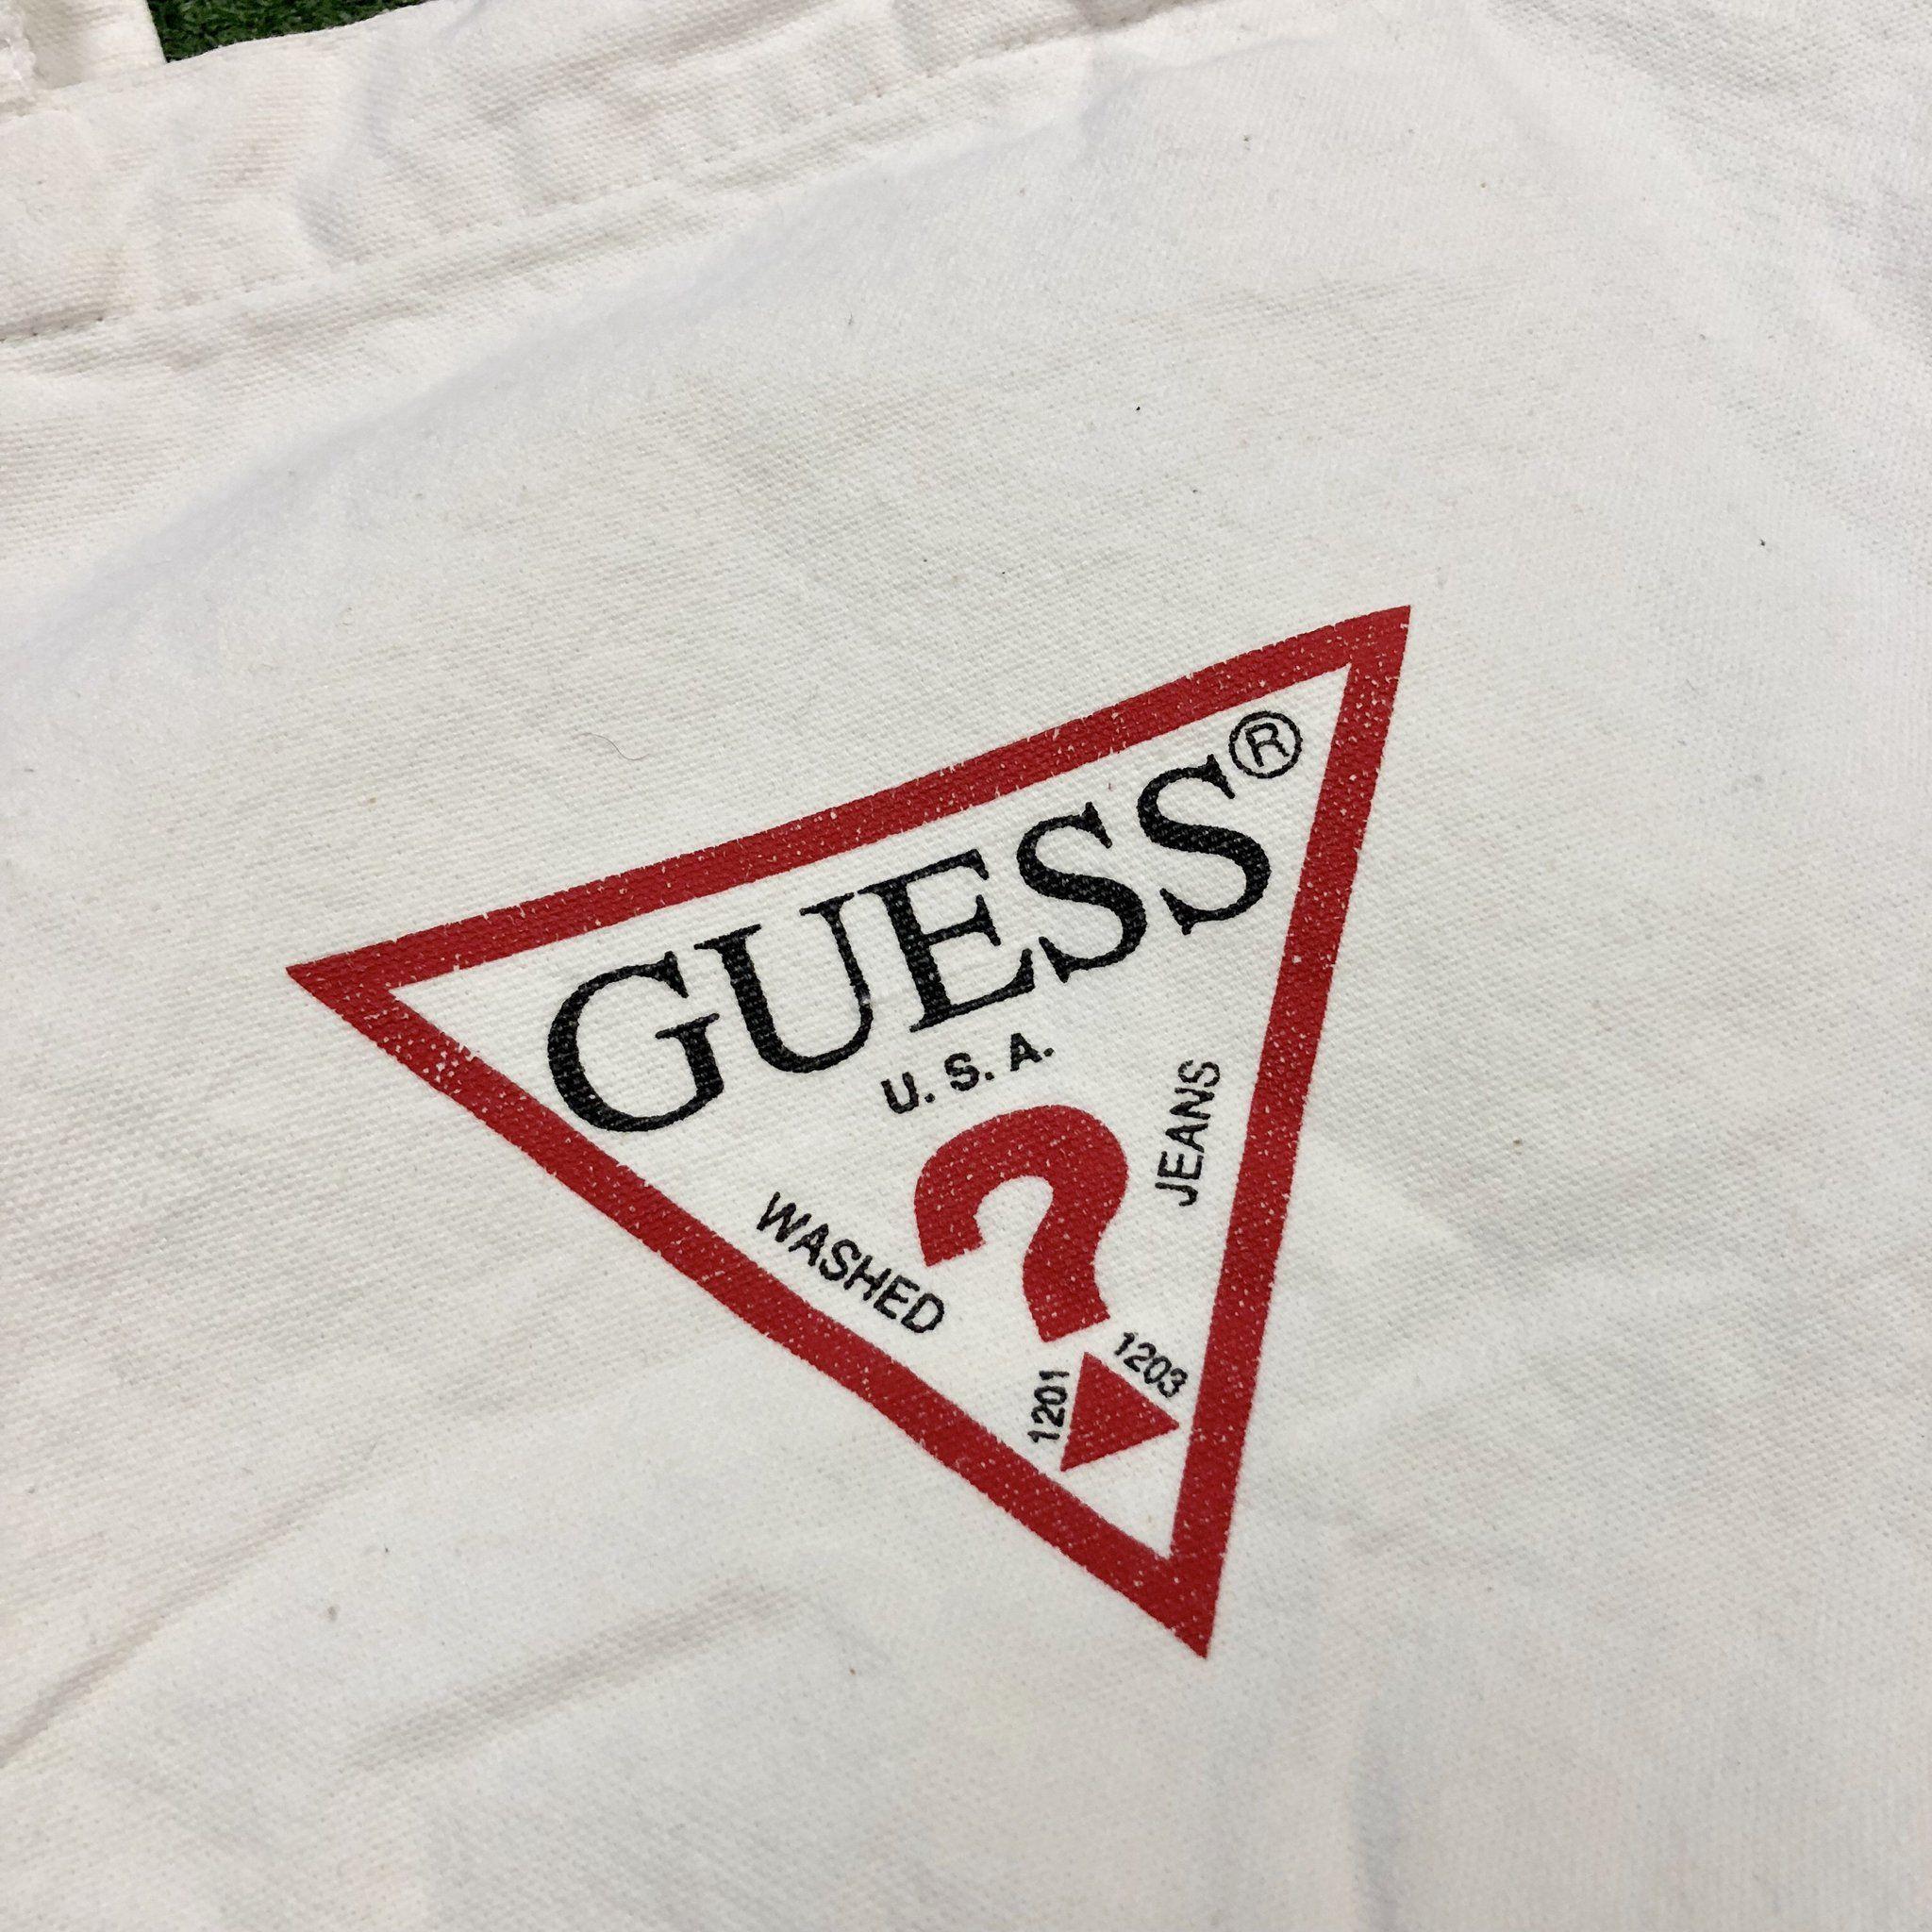 Guess Jeans Logo - 90s Guess Jeans Logo Tote – Naptown Thrift